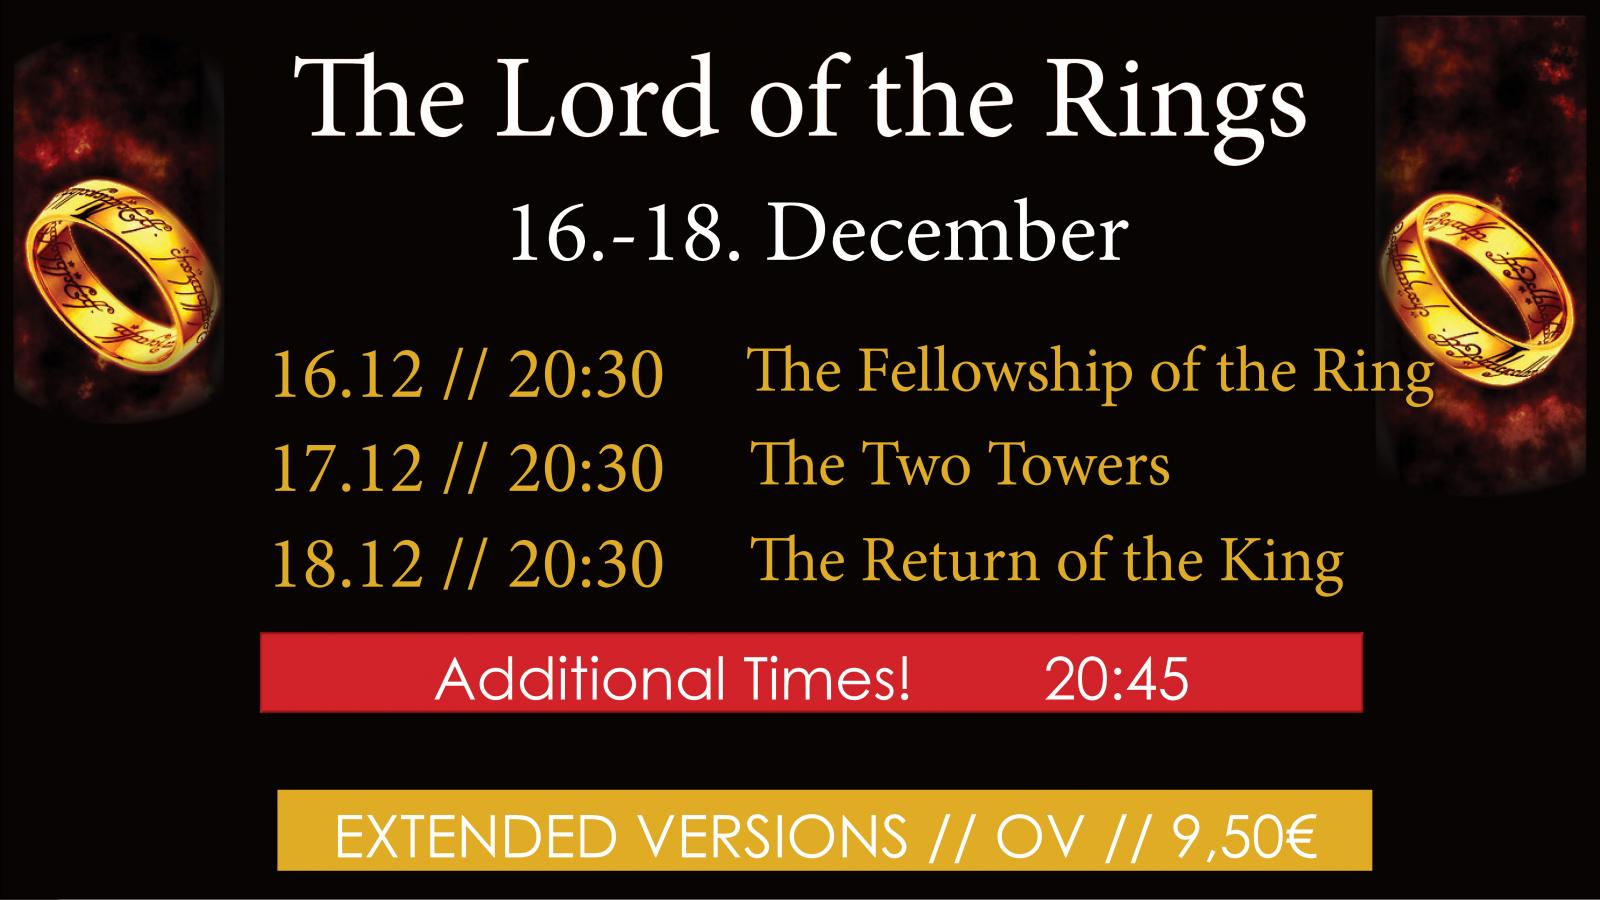 Lord of the Rings Weekend